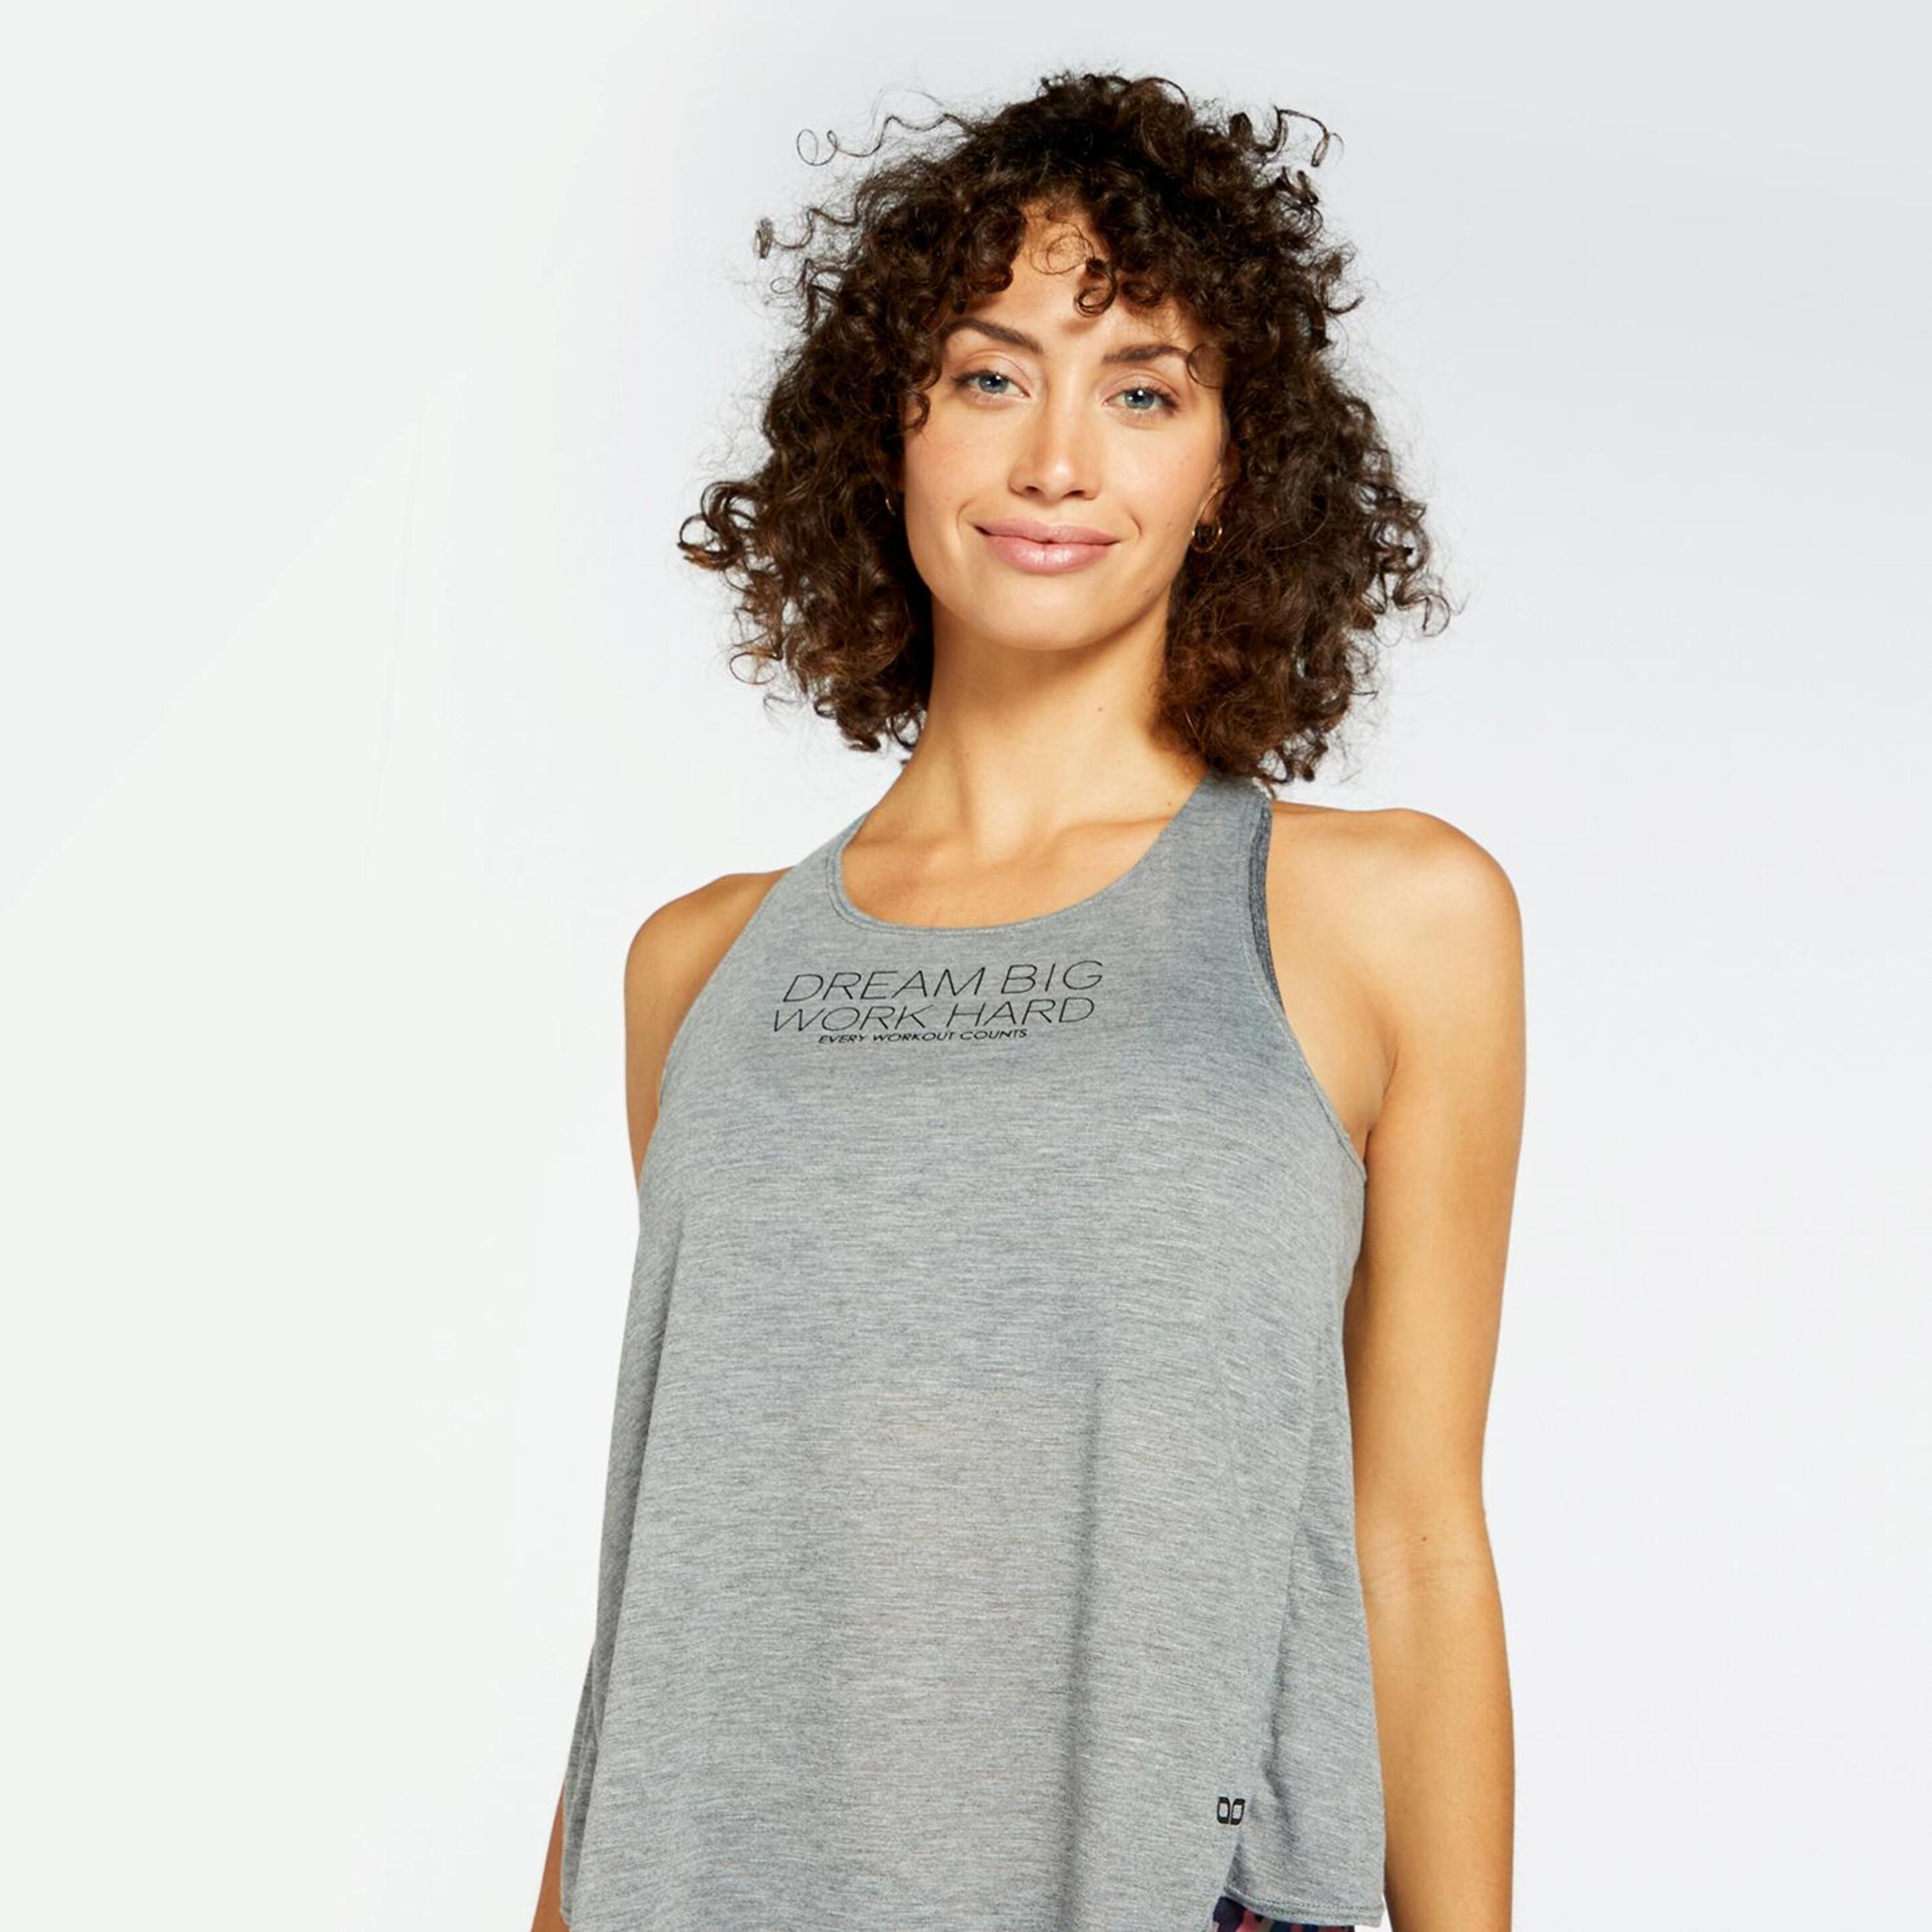 Doone Supportive - gris - Camisola S/mangas Mulher